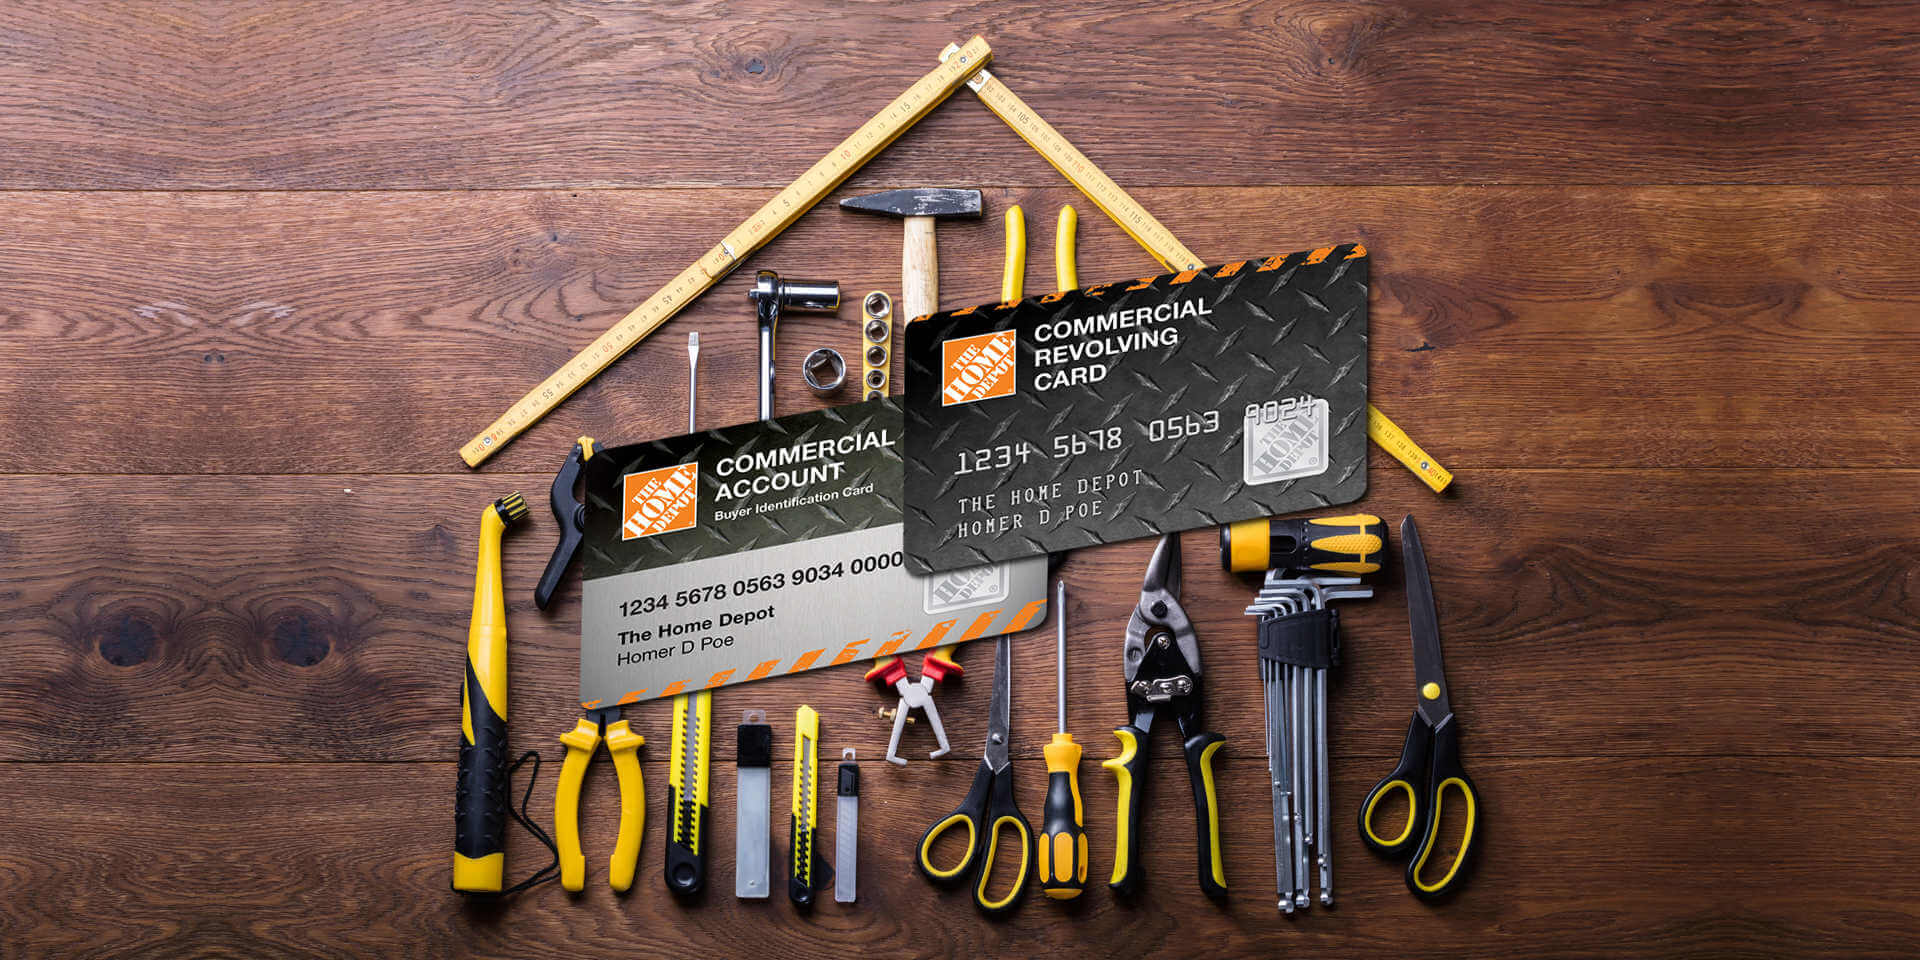 Home Depot Business Credit Card & Commercial Account Review